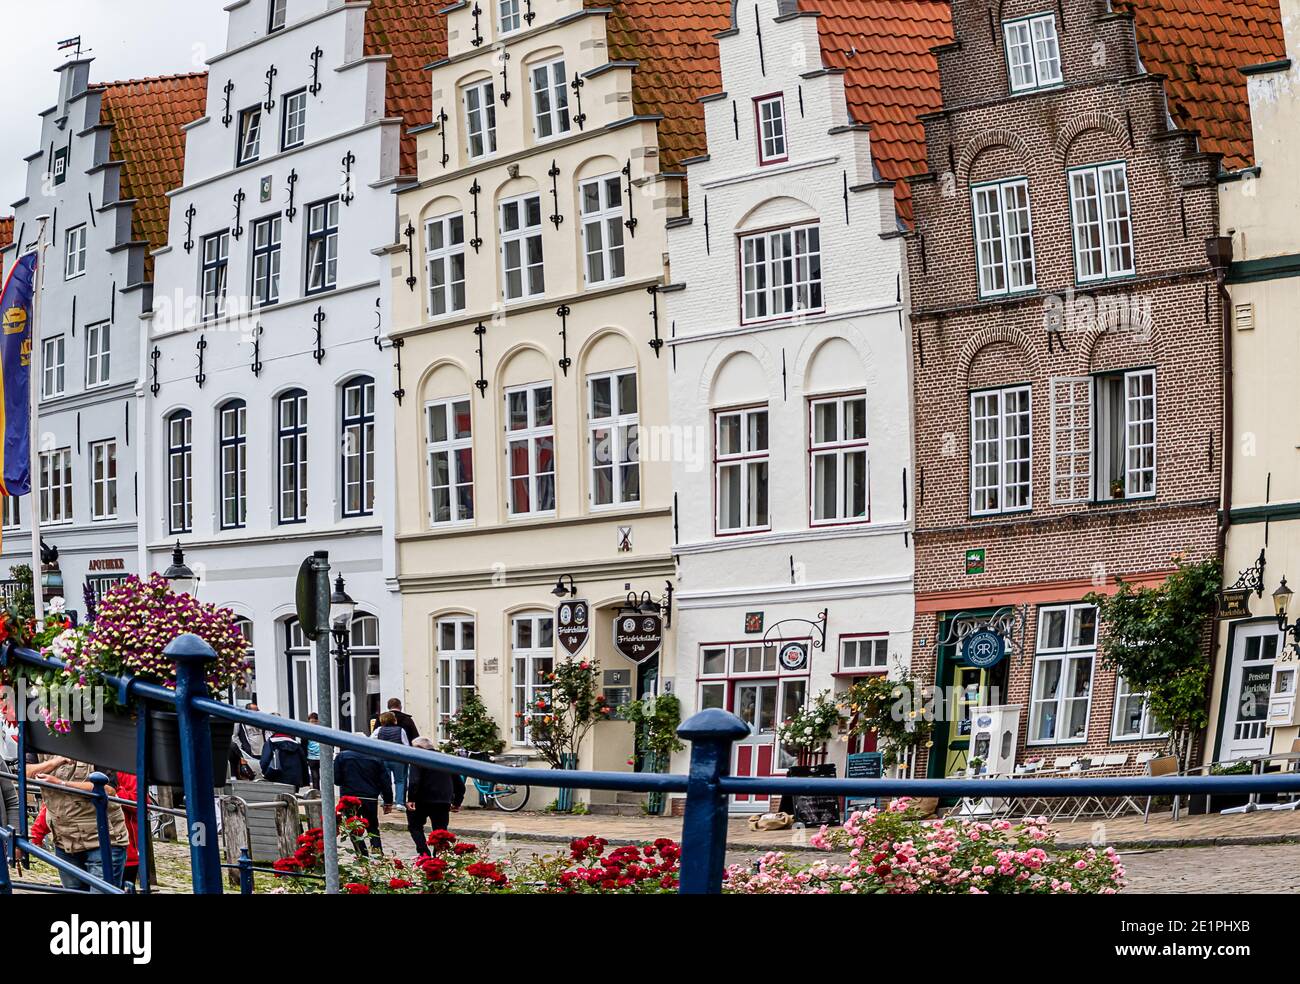 FRIEDRICHSTADT, GERMANY-JULY 13, 2019: Marketplace with a row of historic gabled houses on the market square in Friedrichstadt,Germany Stock Photo